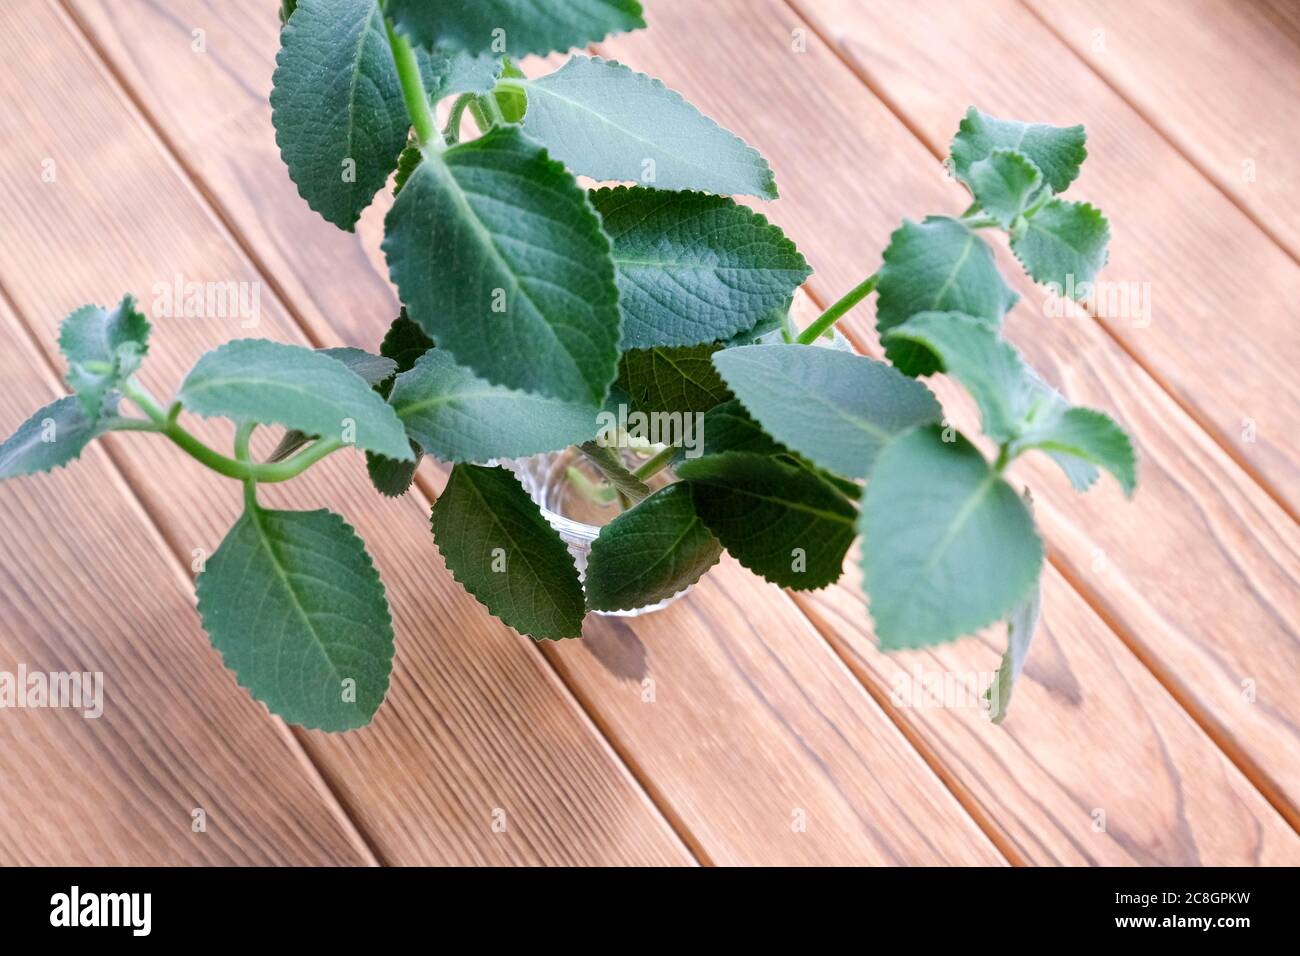 Mint in a glass on a wooden blurred background. Sprigs of mint in water. Stock Photo